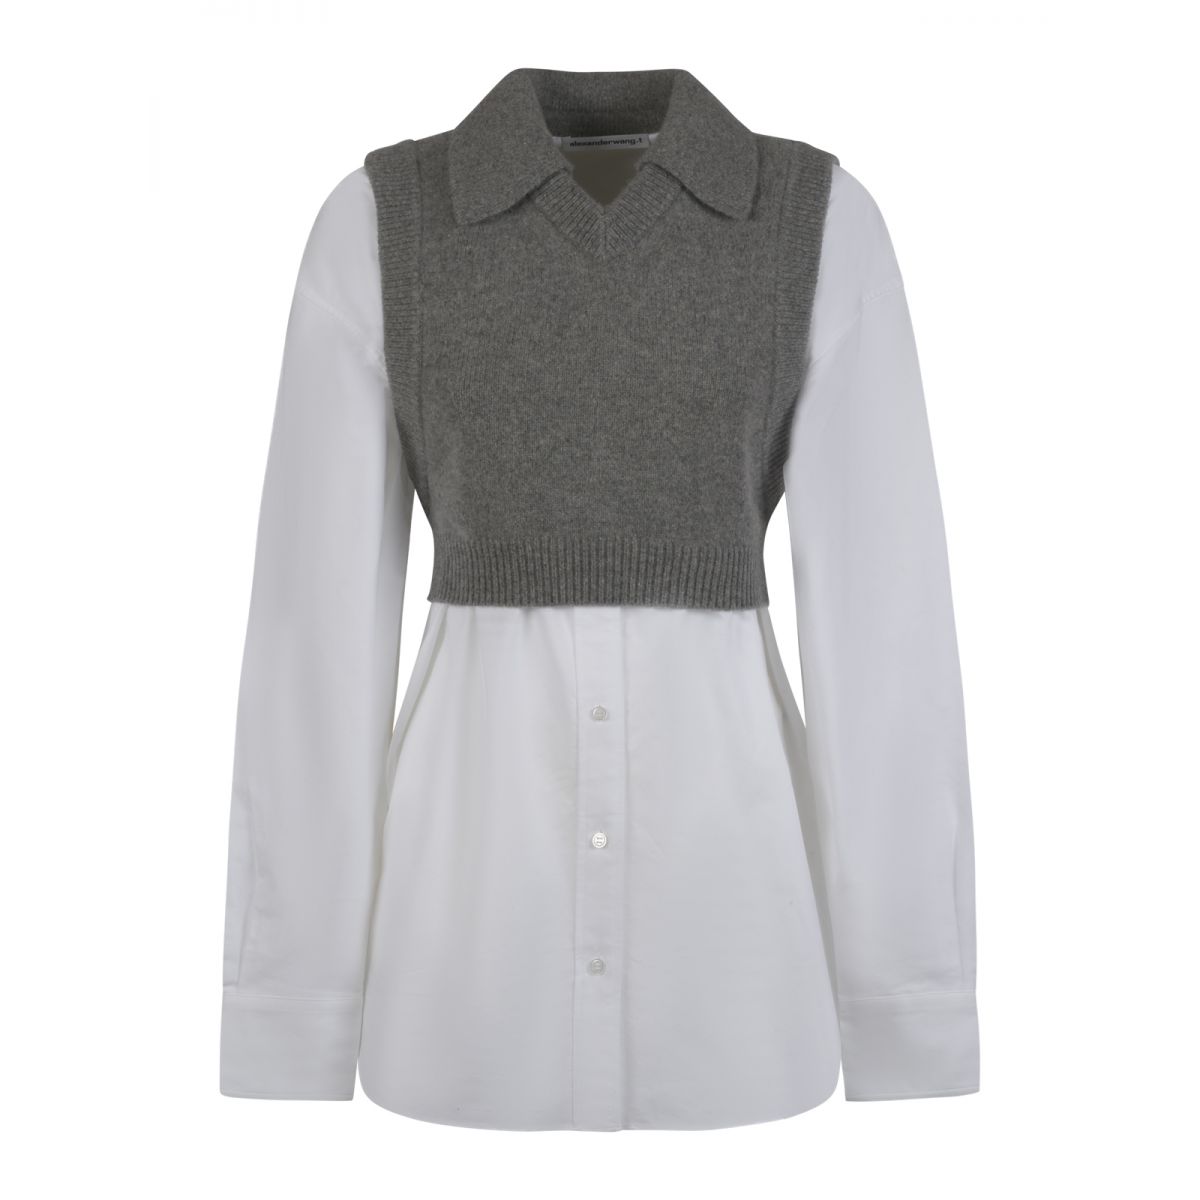 ALEXANDER WANG - Oxford shirt with attached vest top